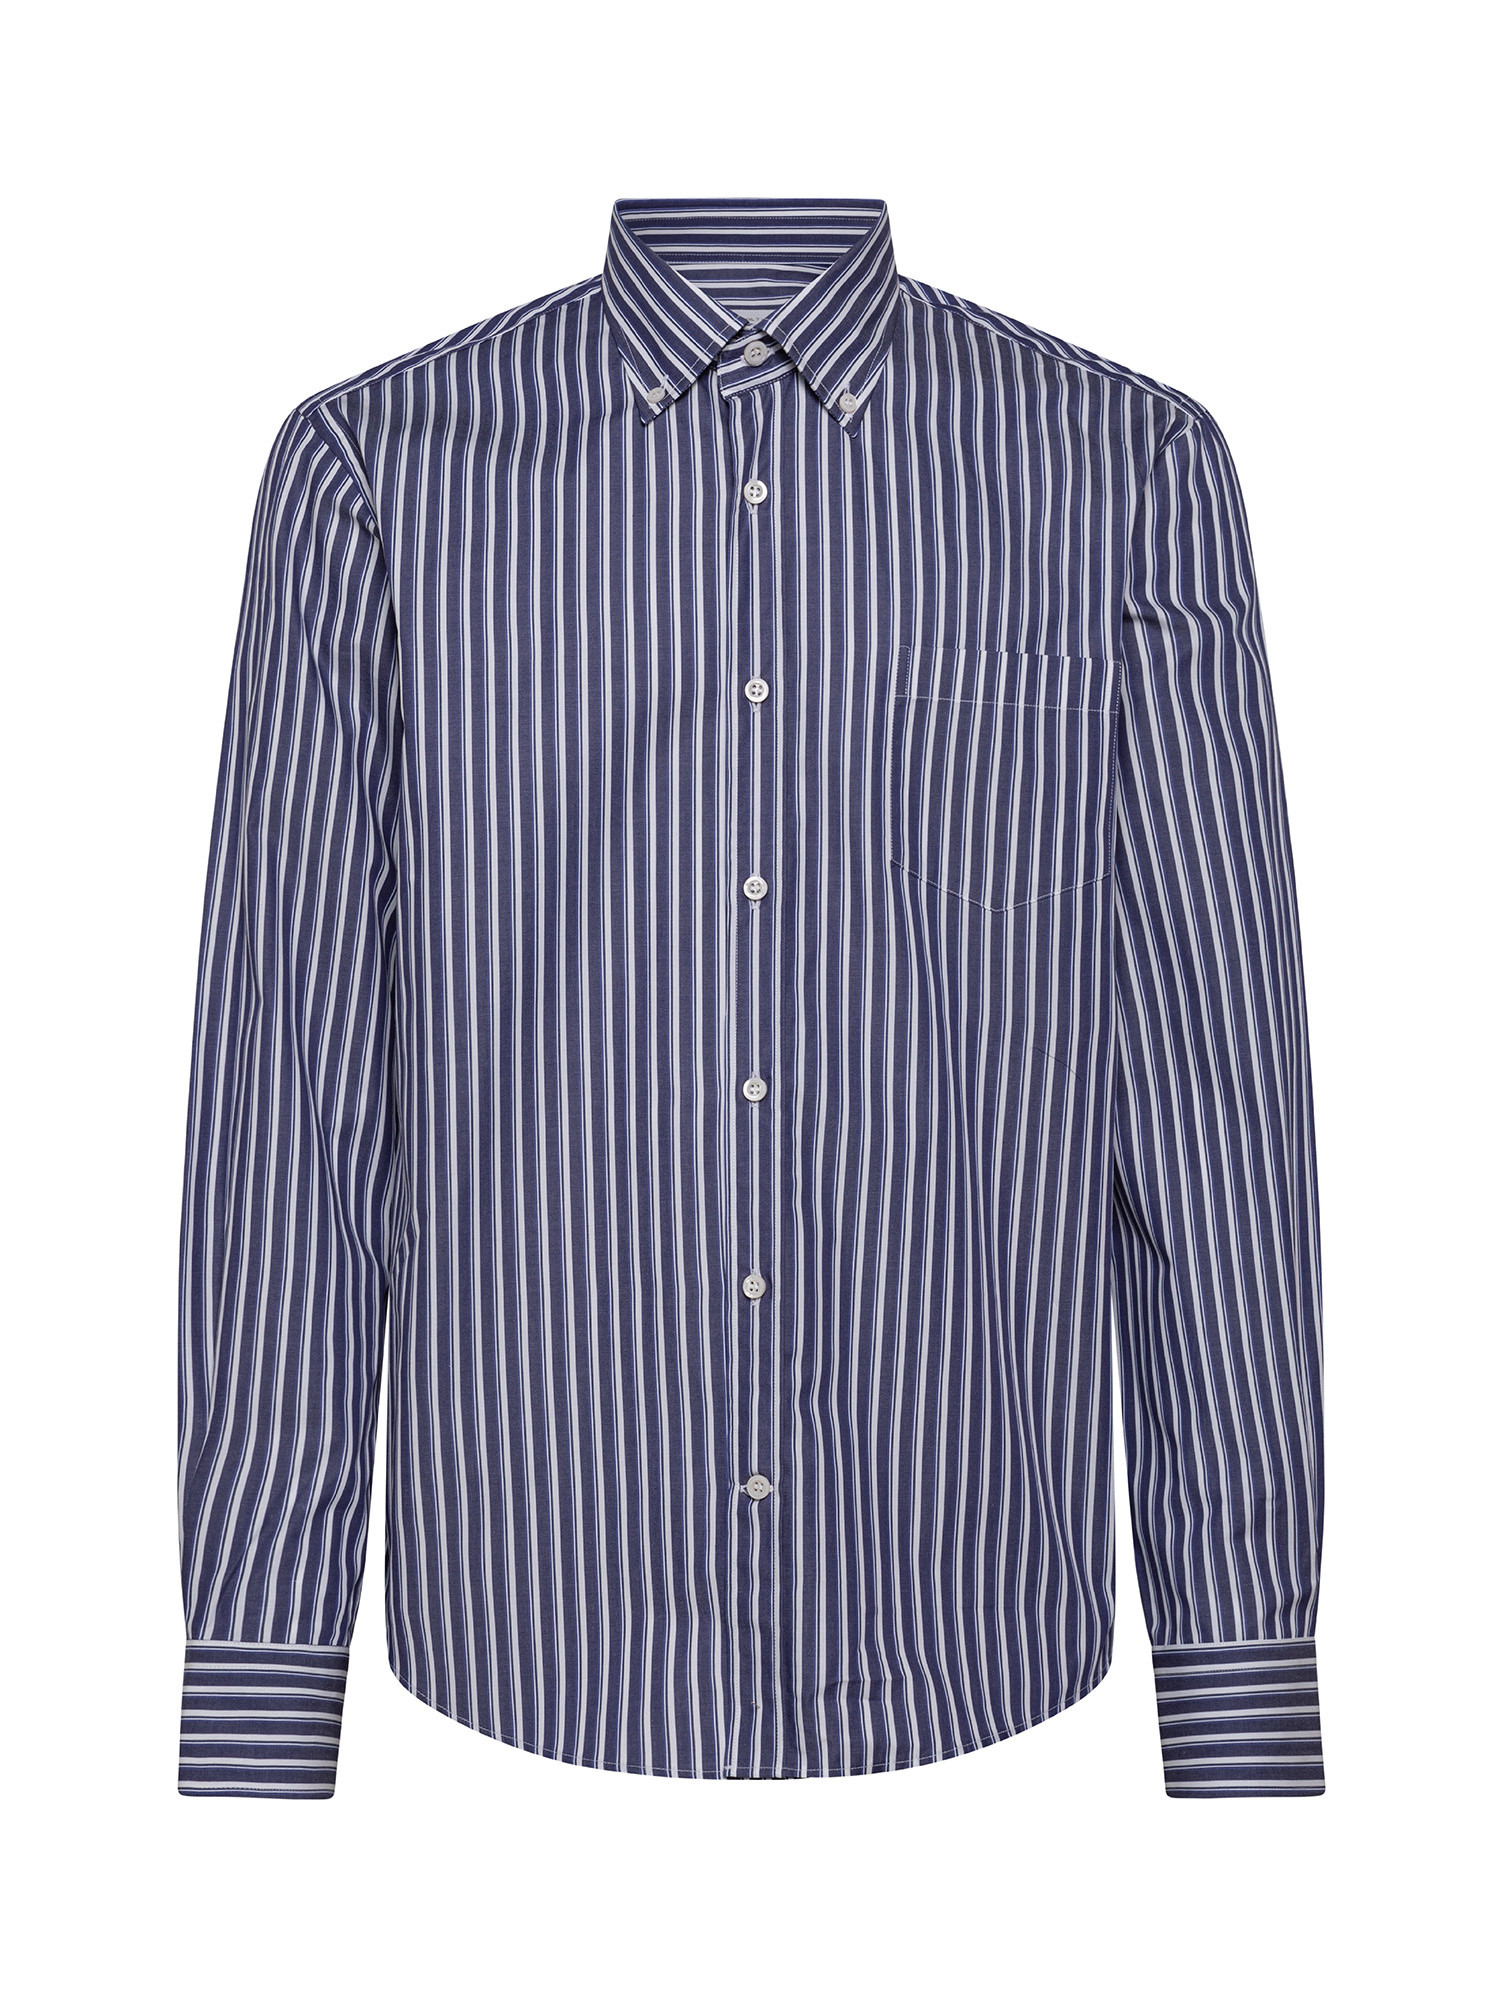 Luca D'Altieri - Tailor fit striped shirt in pure cotton, Blue, large image number 1